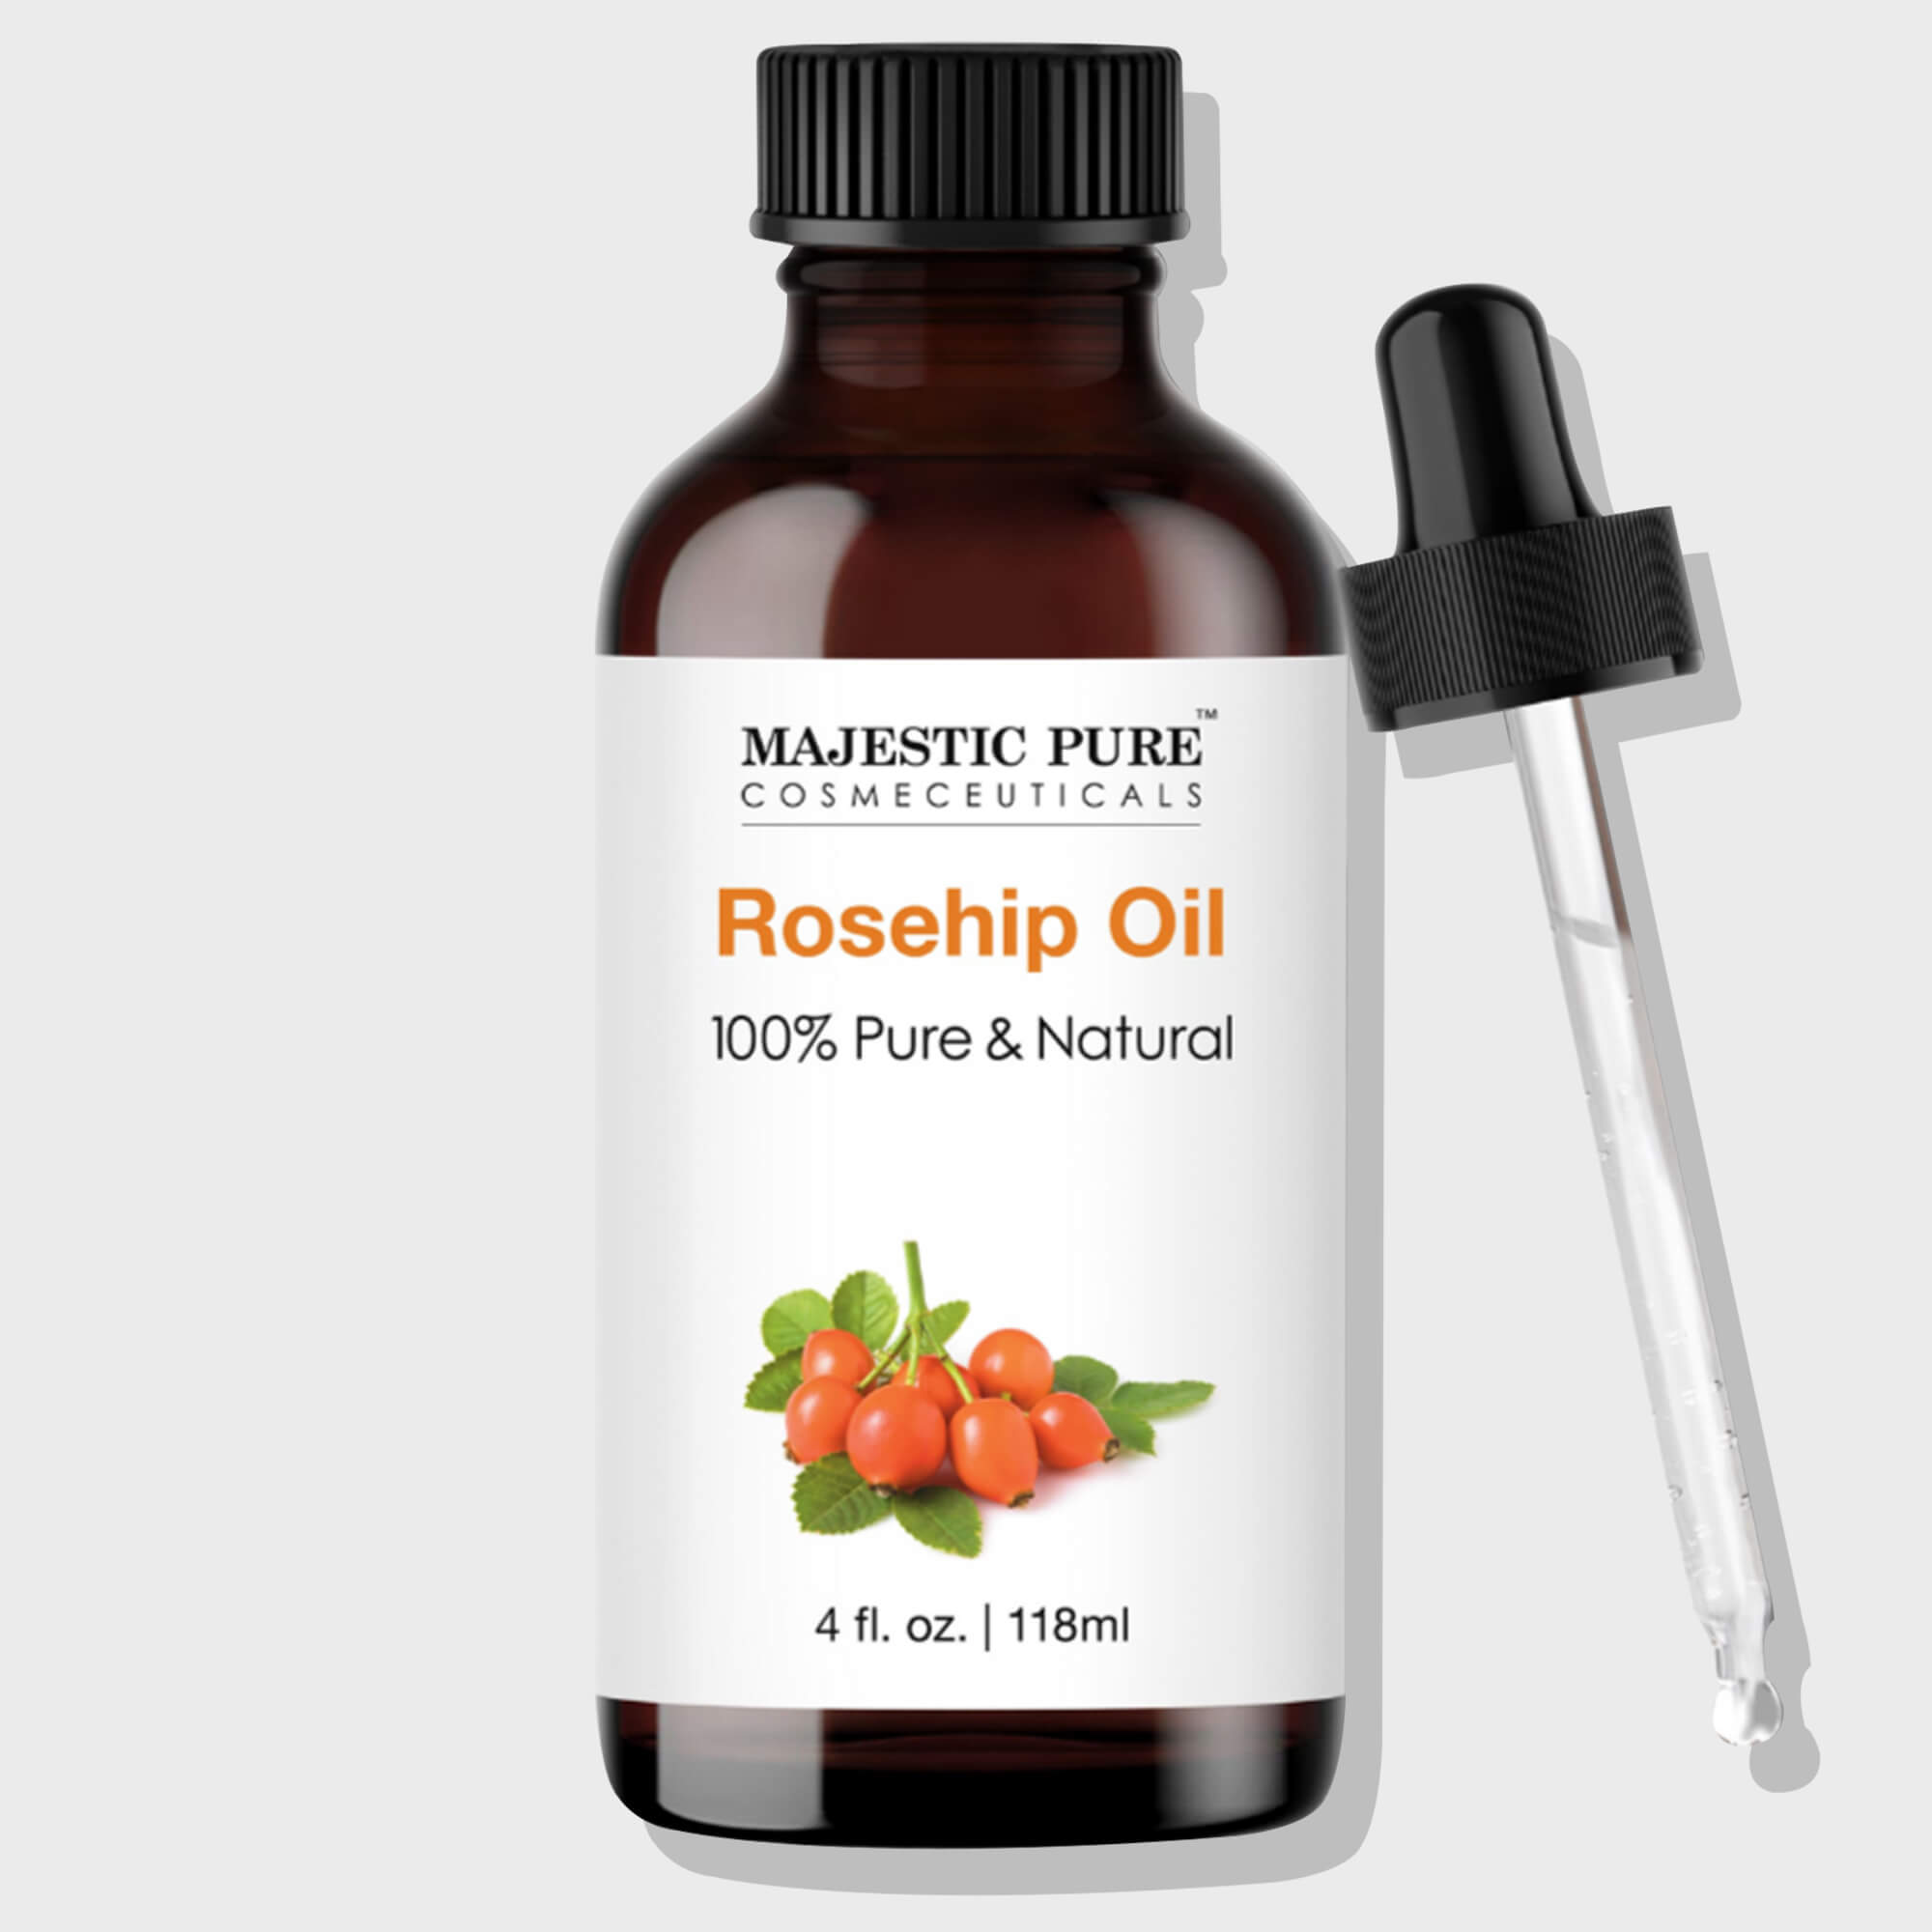 MAJESTIC PURE Rosehip Oil for Face, Nails, Hair and Skin, Pure & Natural, Cold Pressed Premium Rose Hip Seed Oil, 4 Fl Oz